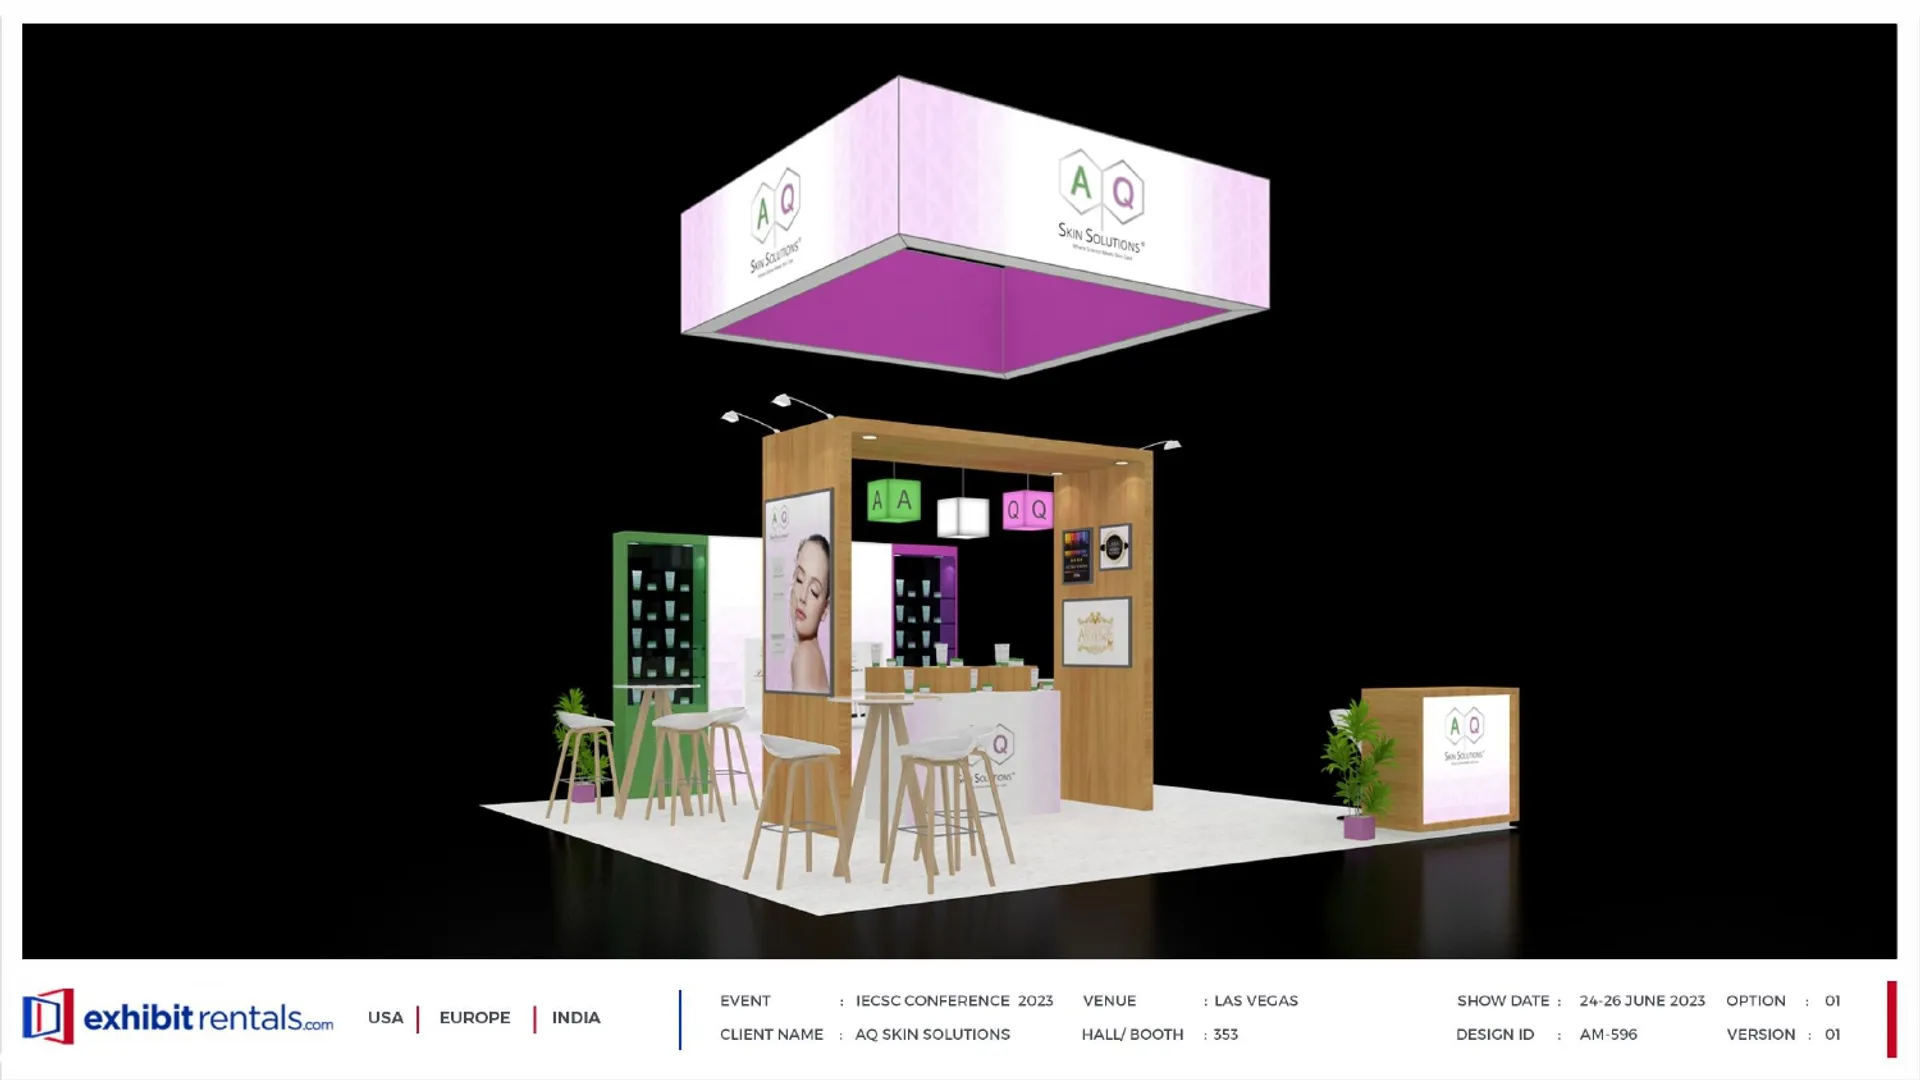 booth-design-projects/Exhibit-Rentals/2024-04-18-20x20-ISLAND-Project-85/1.1_AQ Skin Solutions_IECSC Conference_ER design proposal -15_page-0001-jxfybzj.jpg